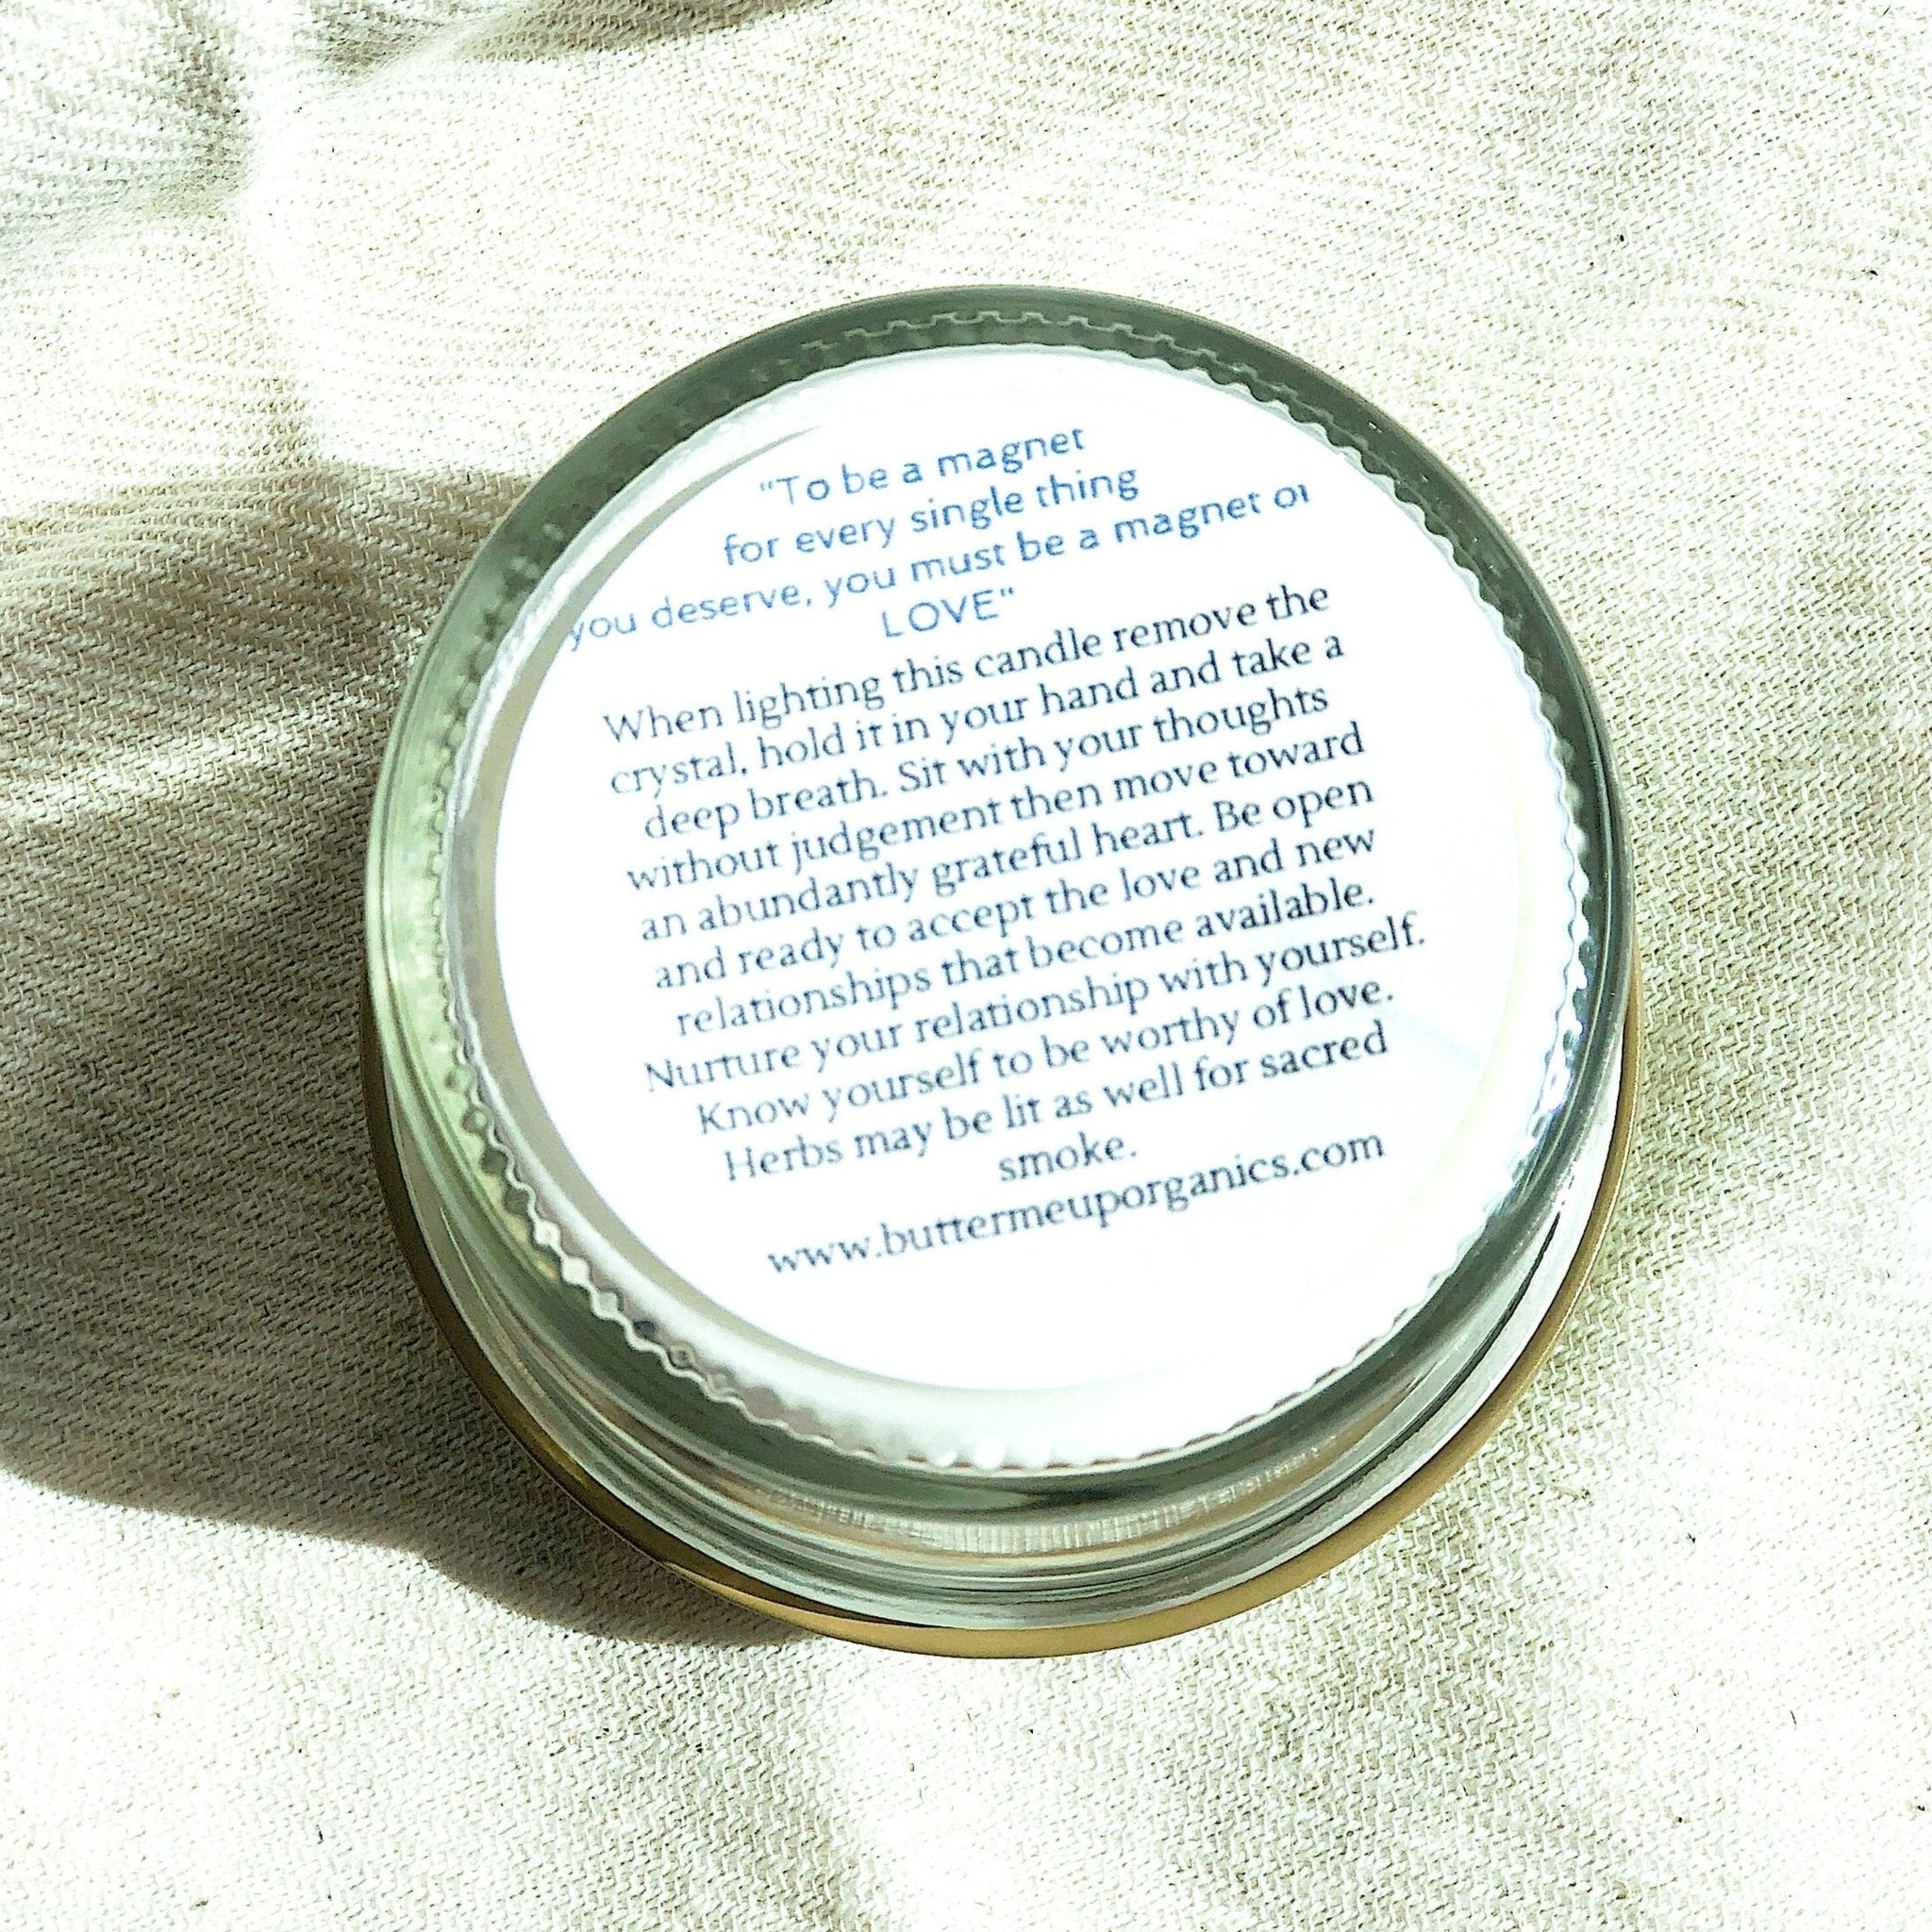 Love Spell Intention Candle - Organic Soy Wax Candle with Crystal